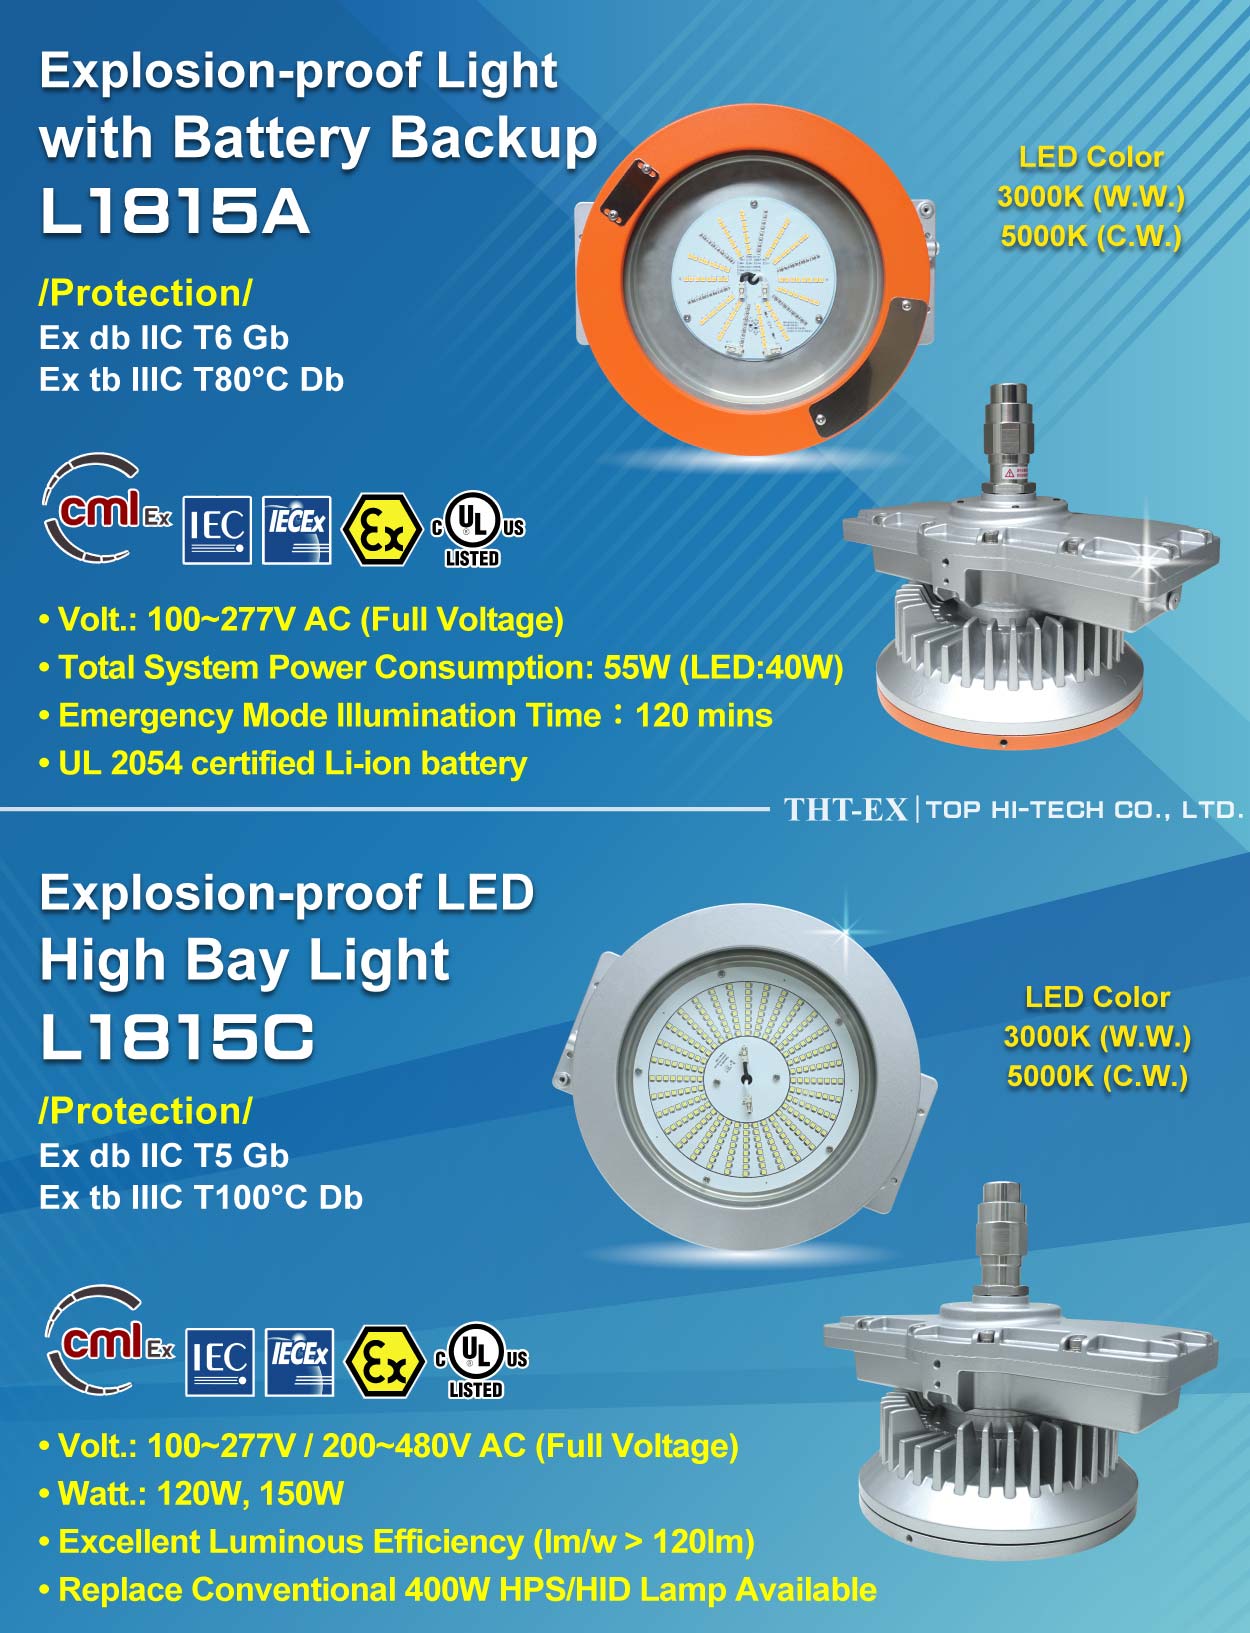 Congrats! Explosion-proof LED Battery Backup Light was Granted Japan CML Certification!